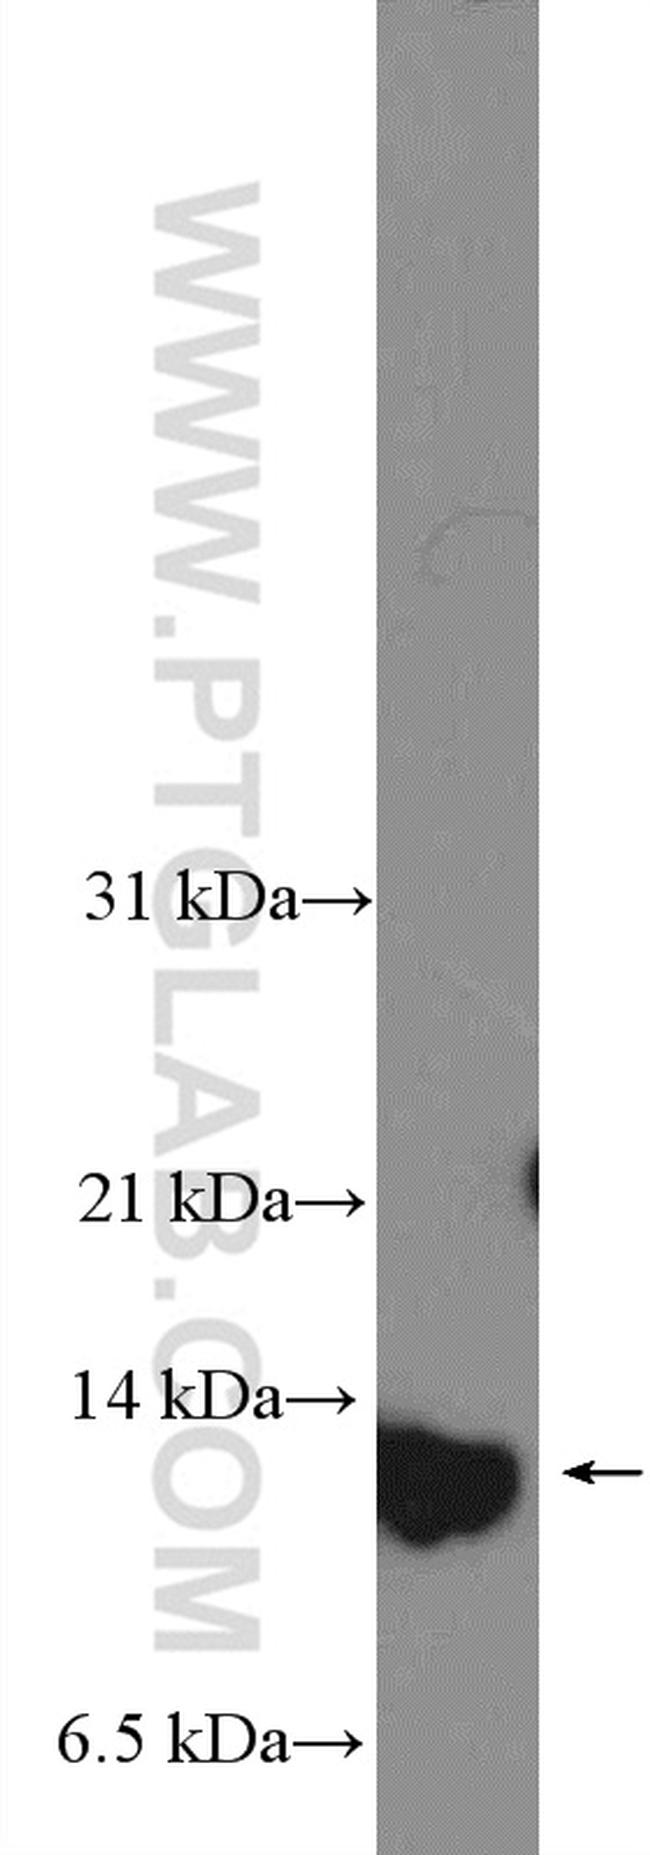 S100A7/Psoriasin Antibody in Western Blot (WB)